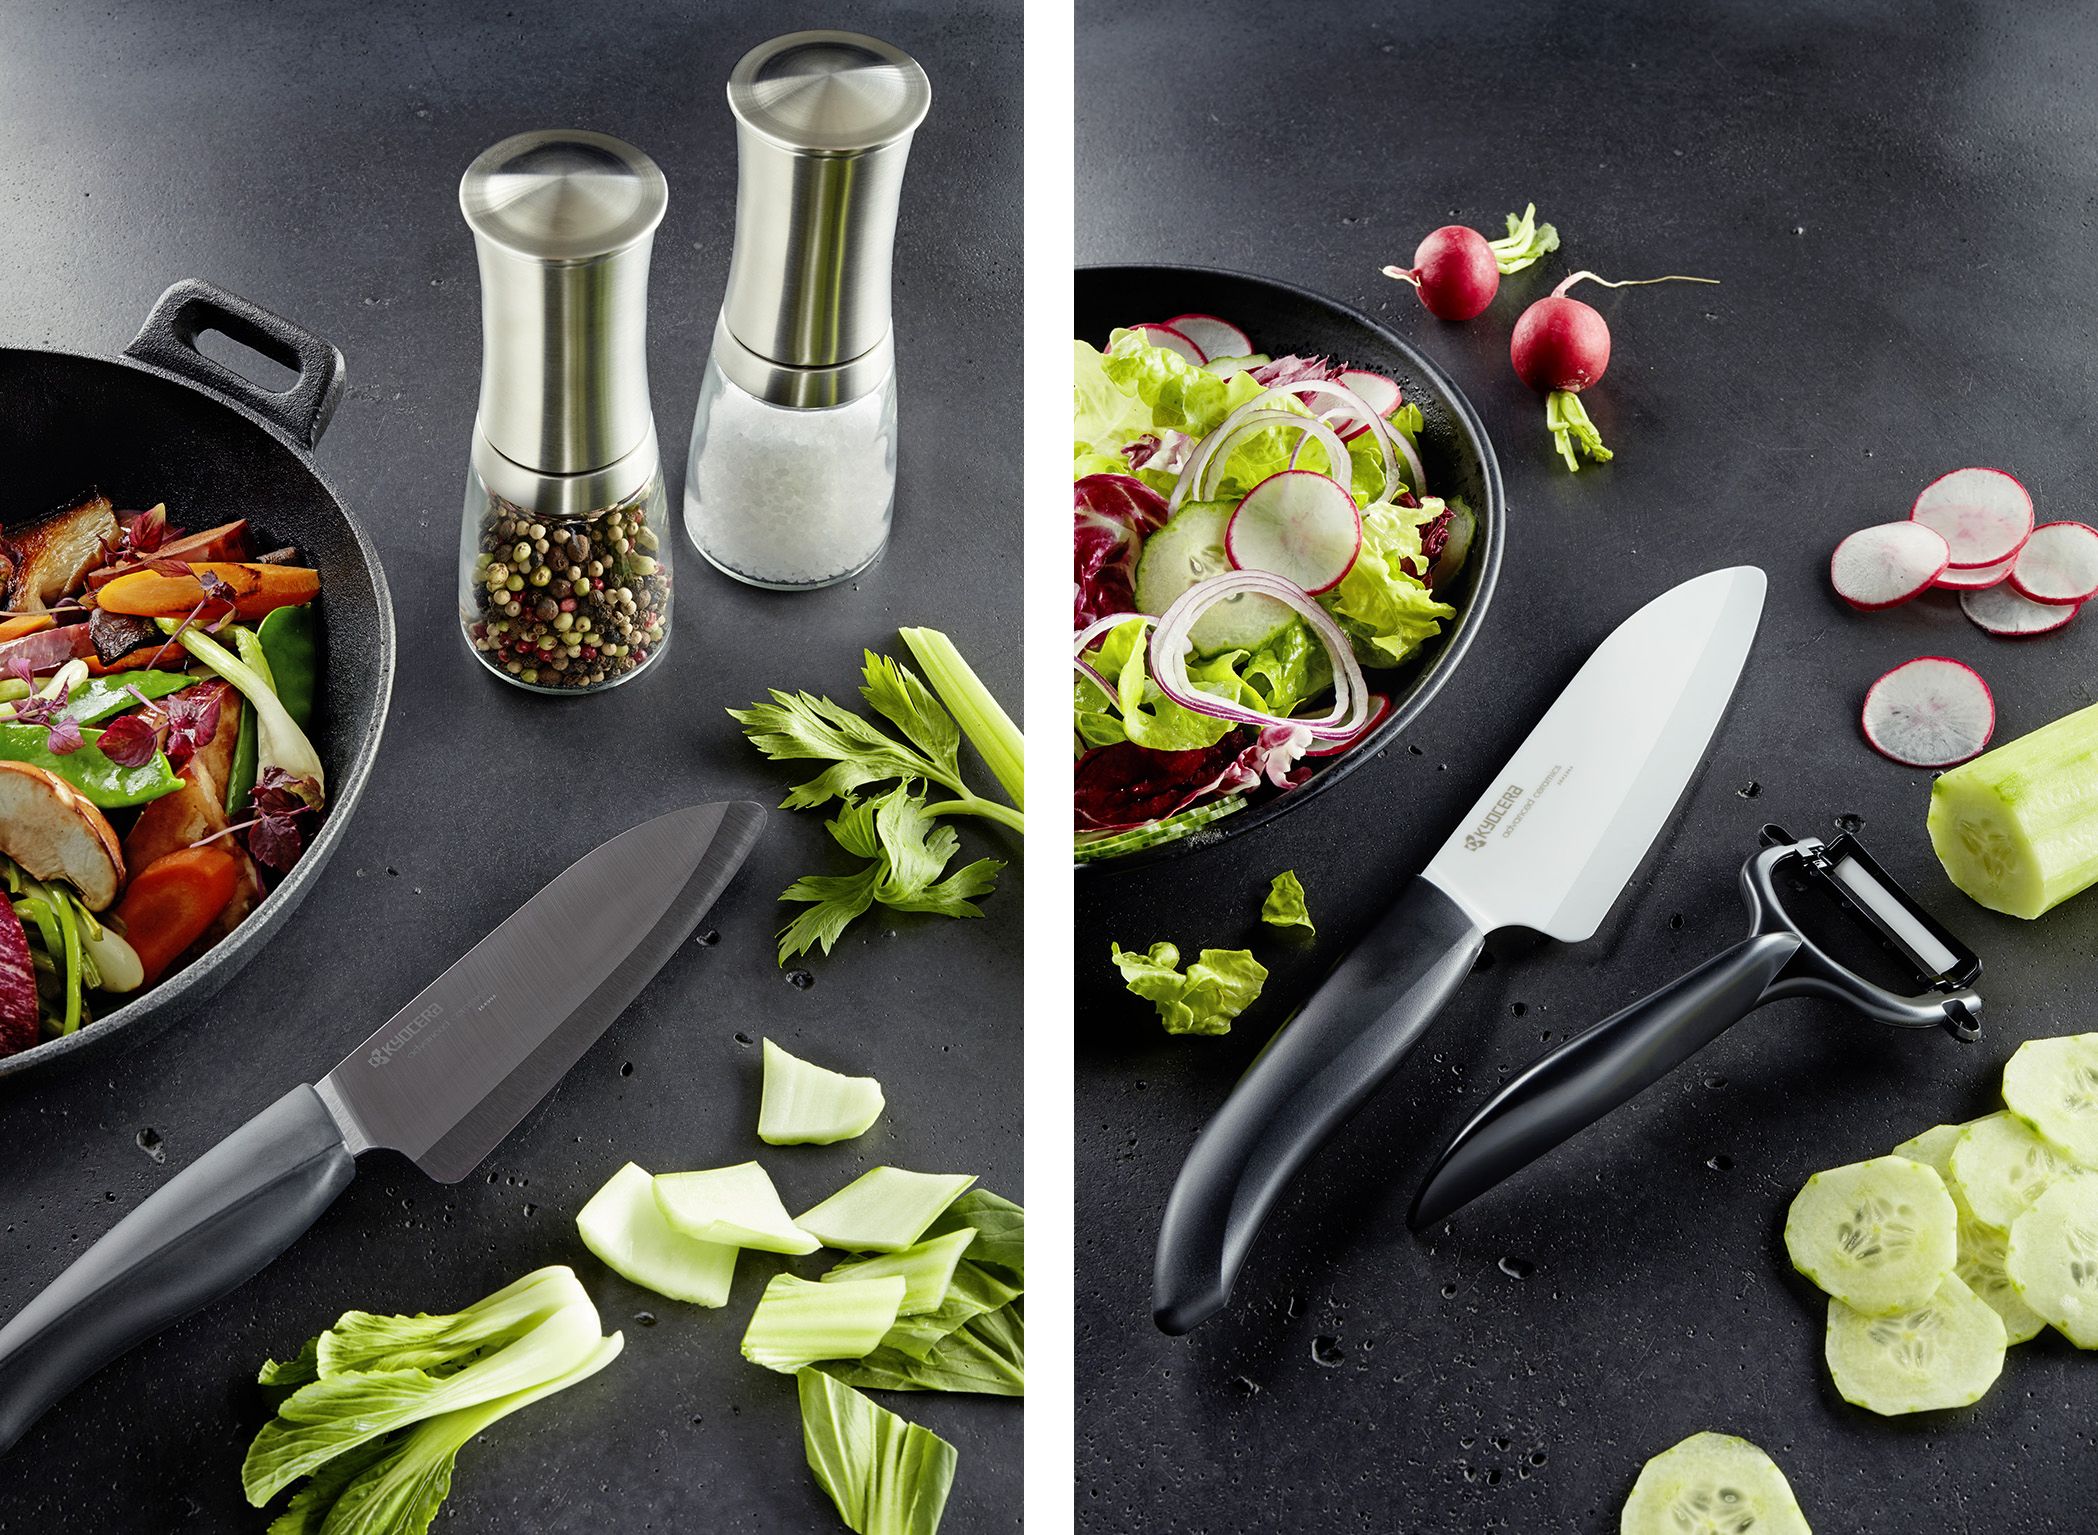 Innovative__durable__and_beautiful__Kyocera_presents_high-quality_kitchen_tools_at_the_BBC_Good_Food_Show.jpg